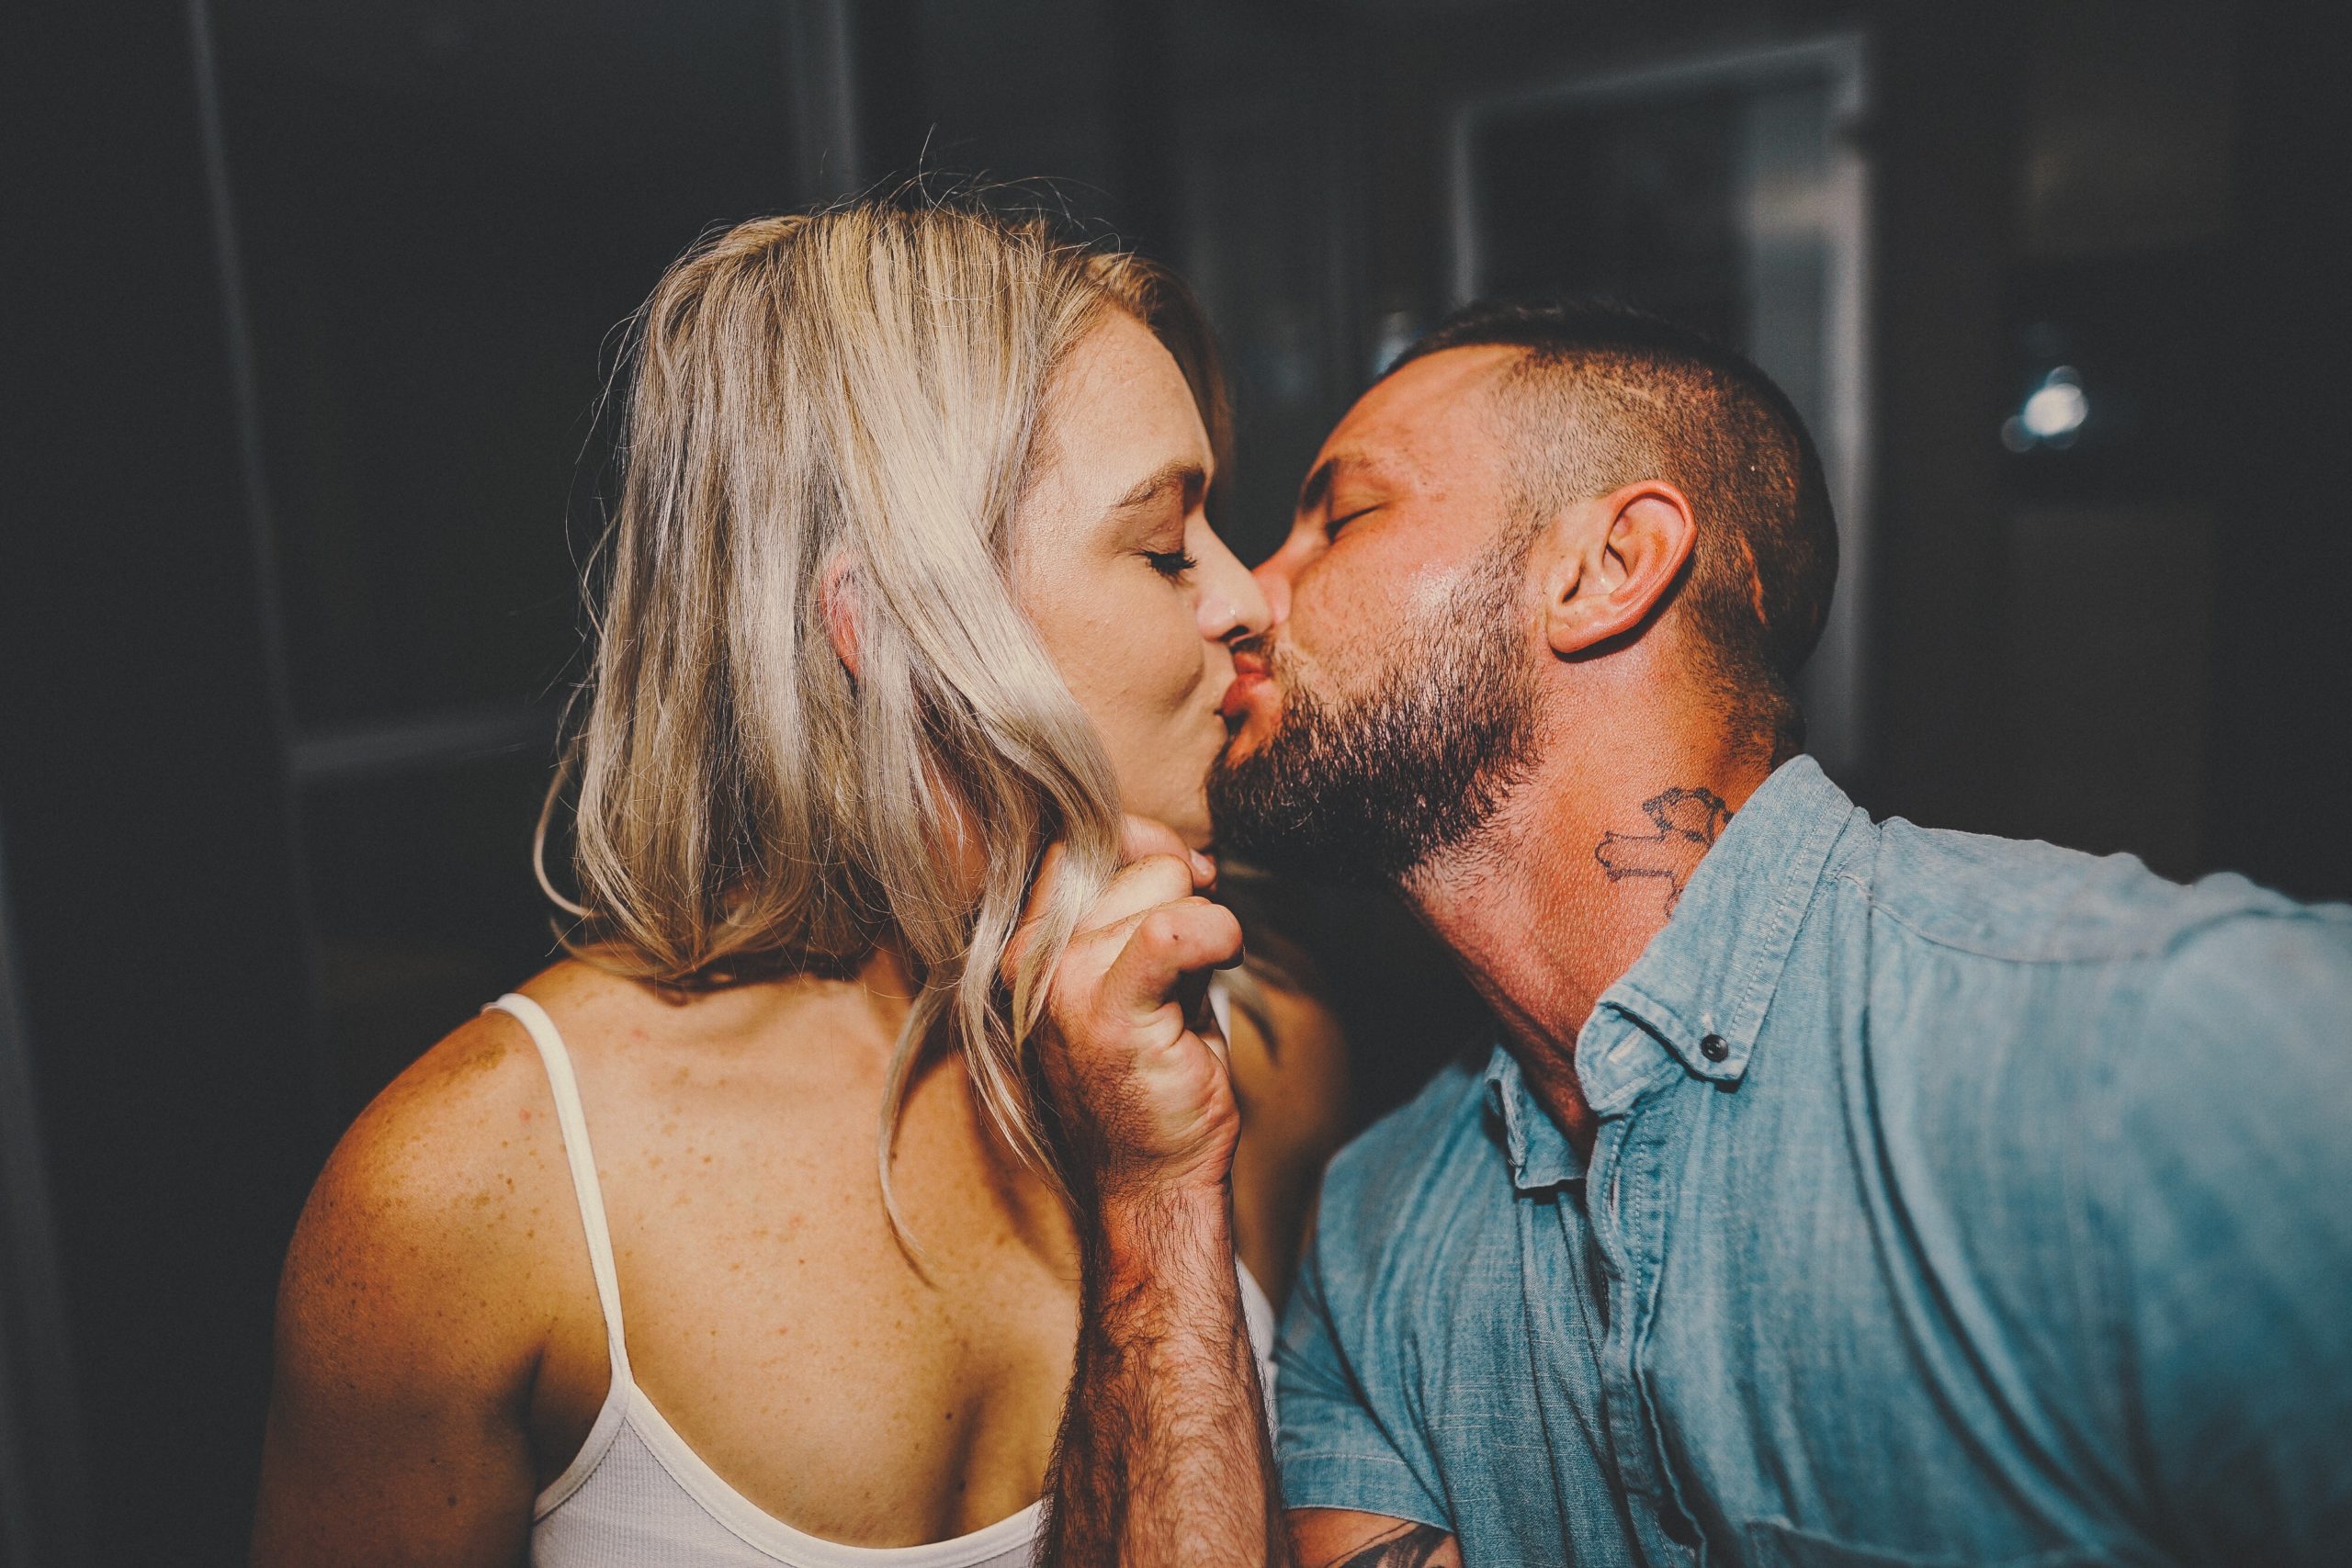 man holds woman's face as they kiss